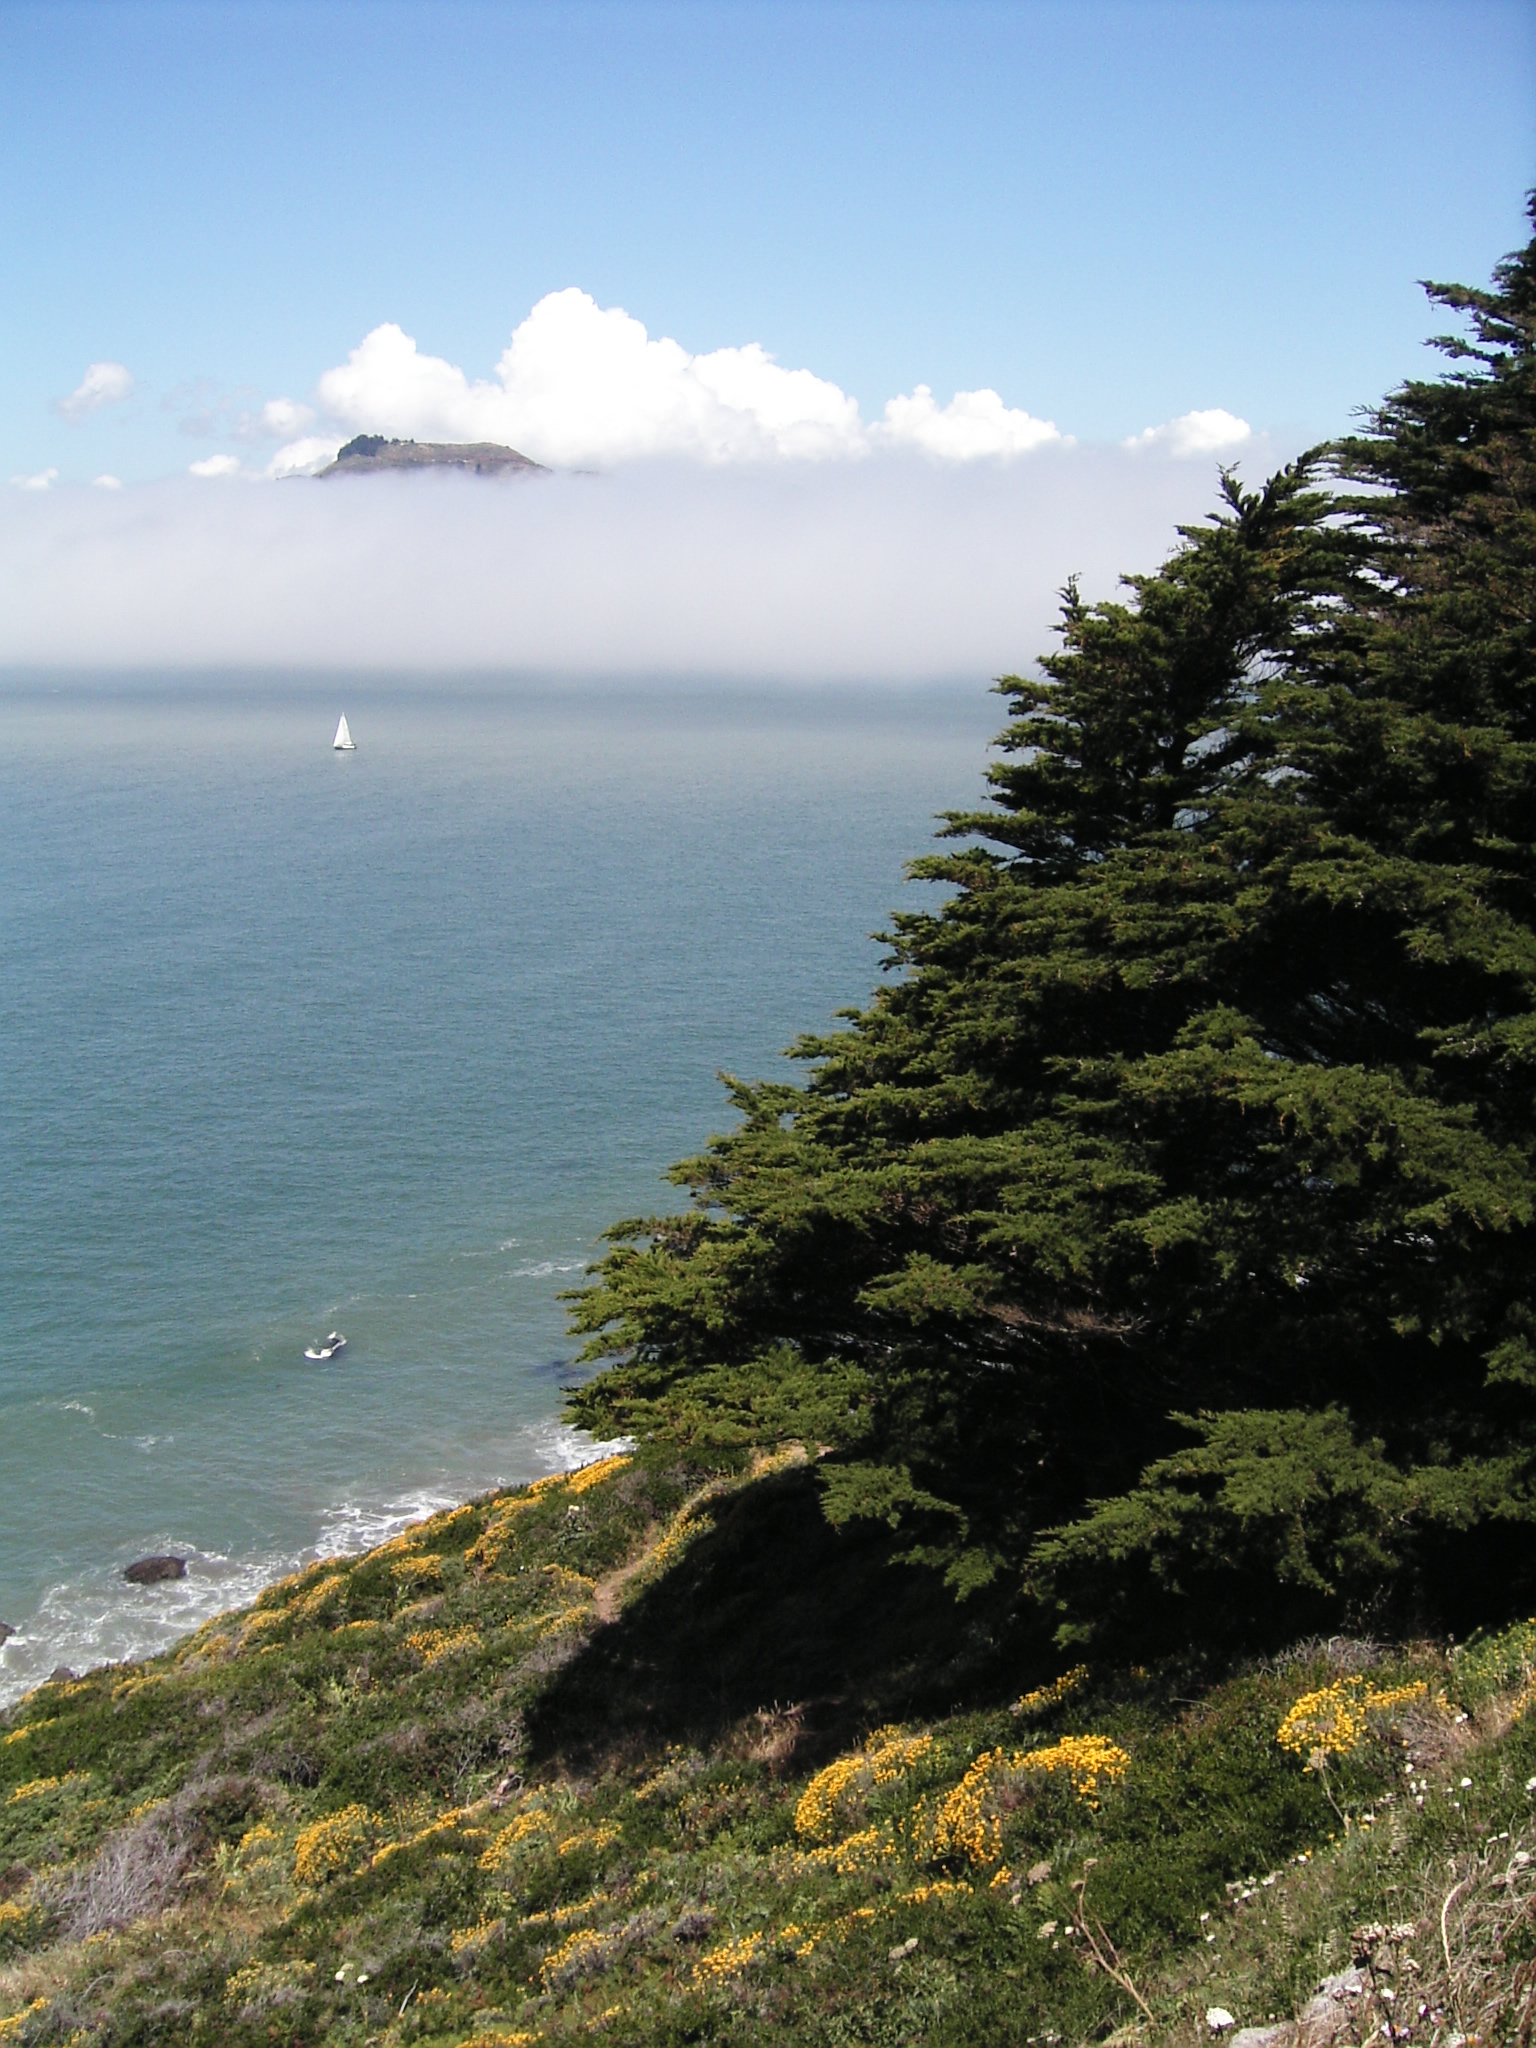 Marin headlands, windswept trees and wildflowers